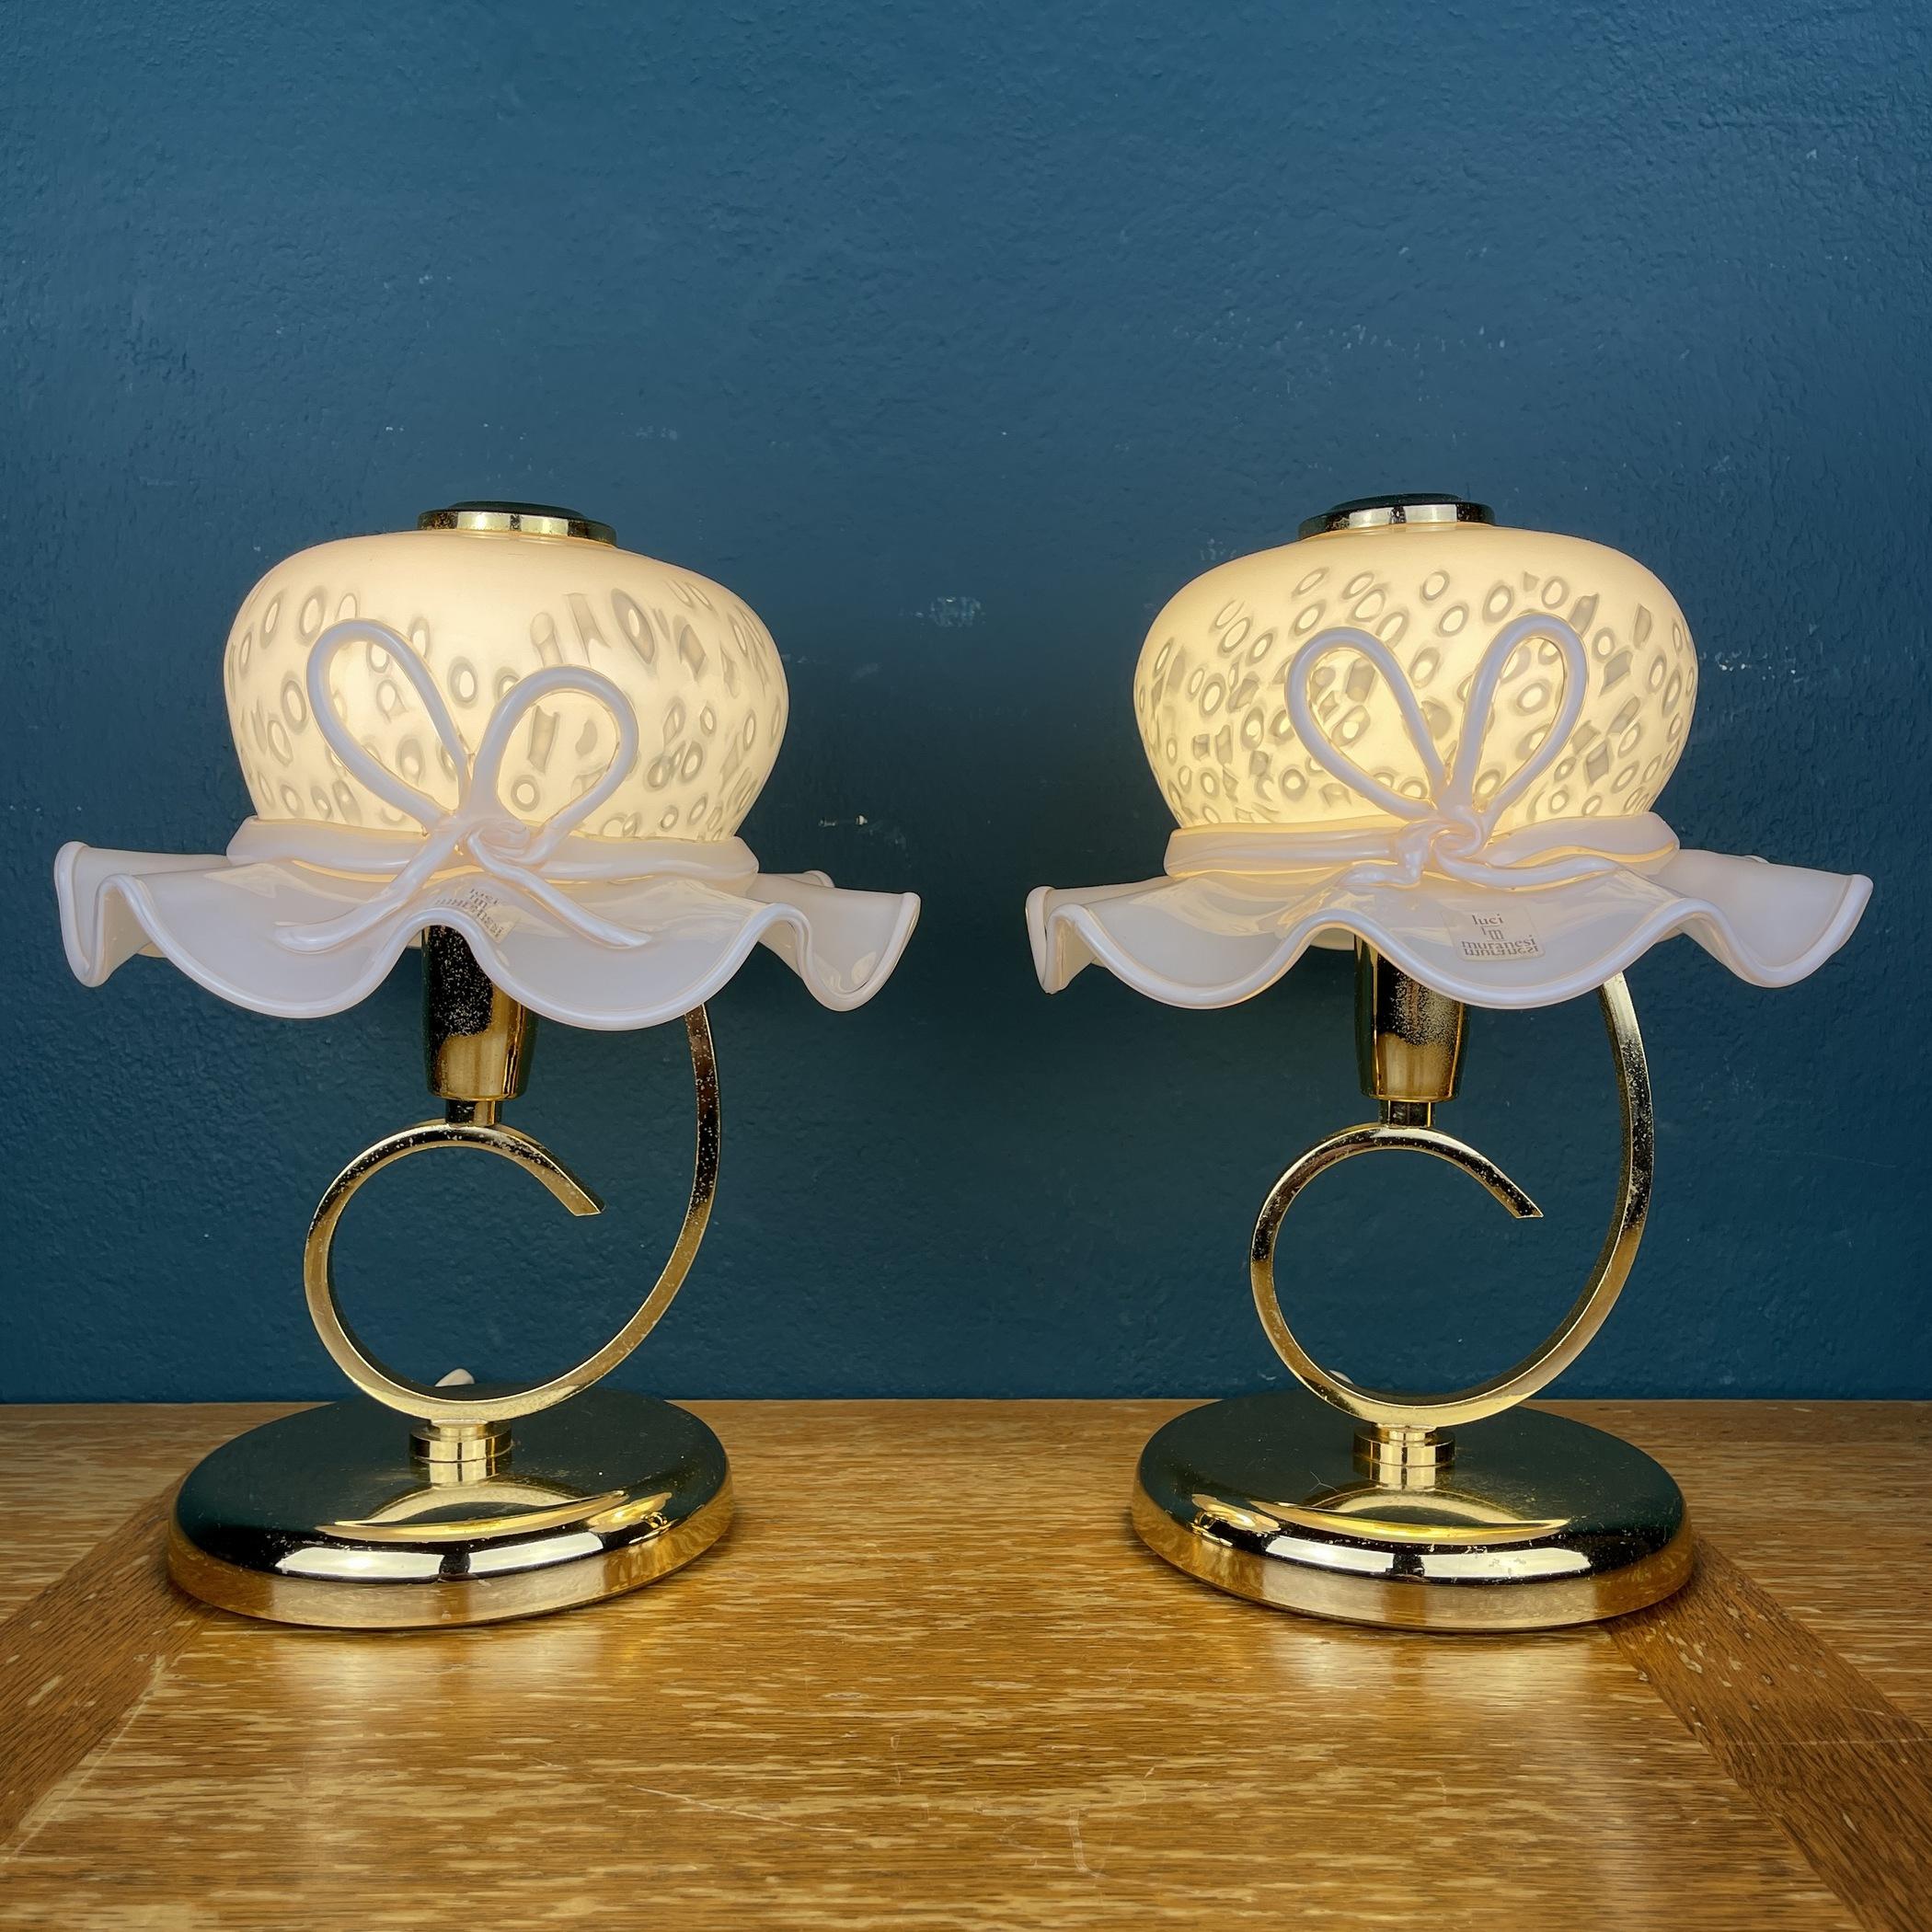 Fantastic pair of 2 table lamps in pink Murano glass in the shape of a woman's hat. Made in Italy in the 1980s by Luci.
Lampshade made of pink Murano glass, made in the 